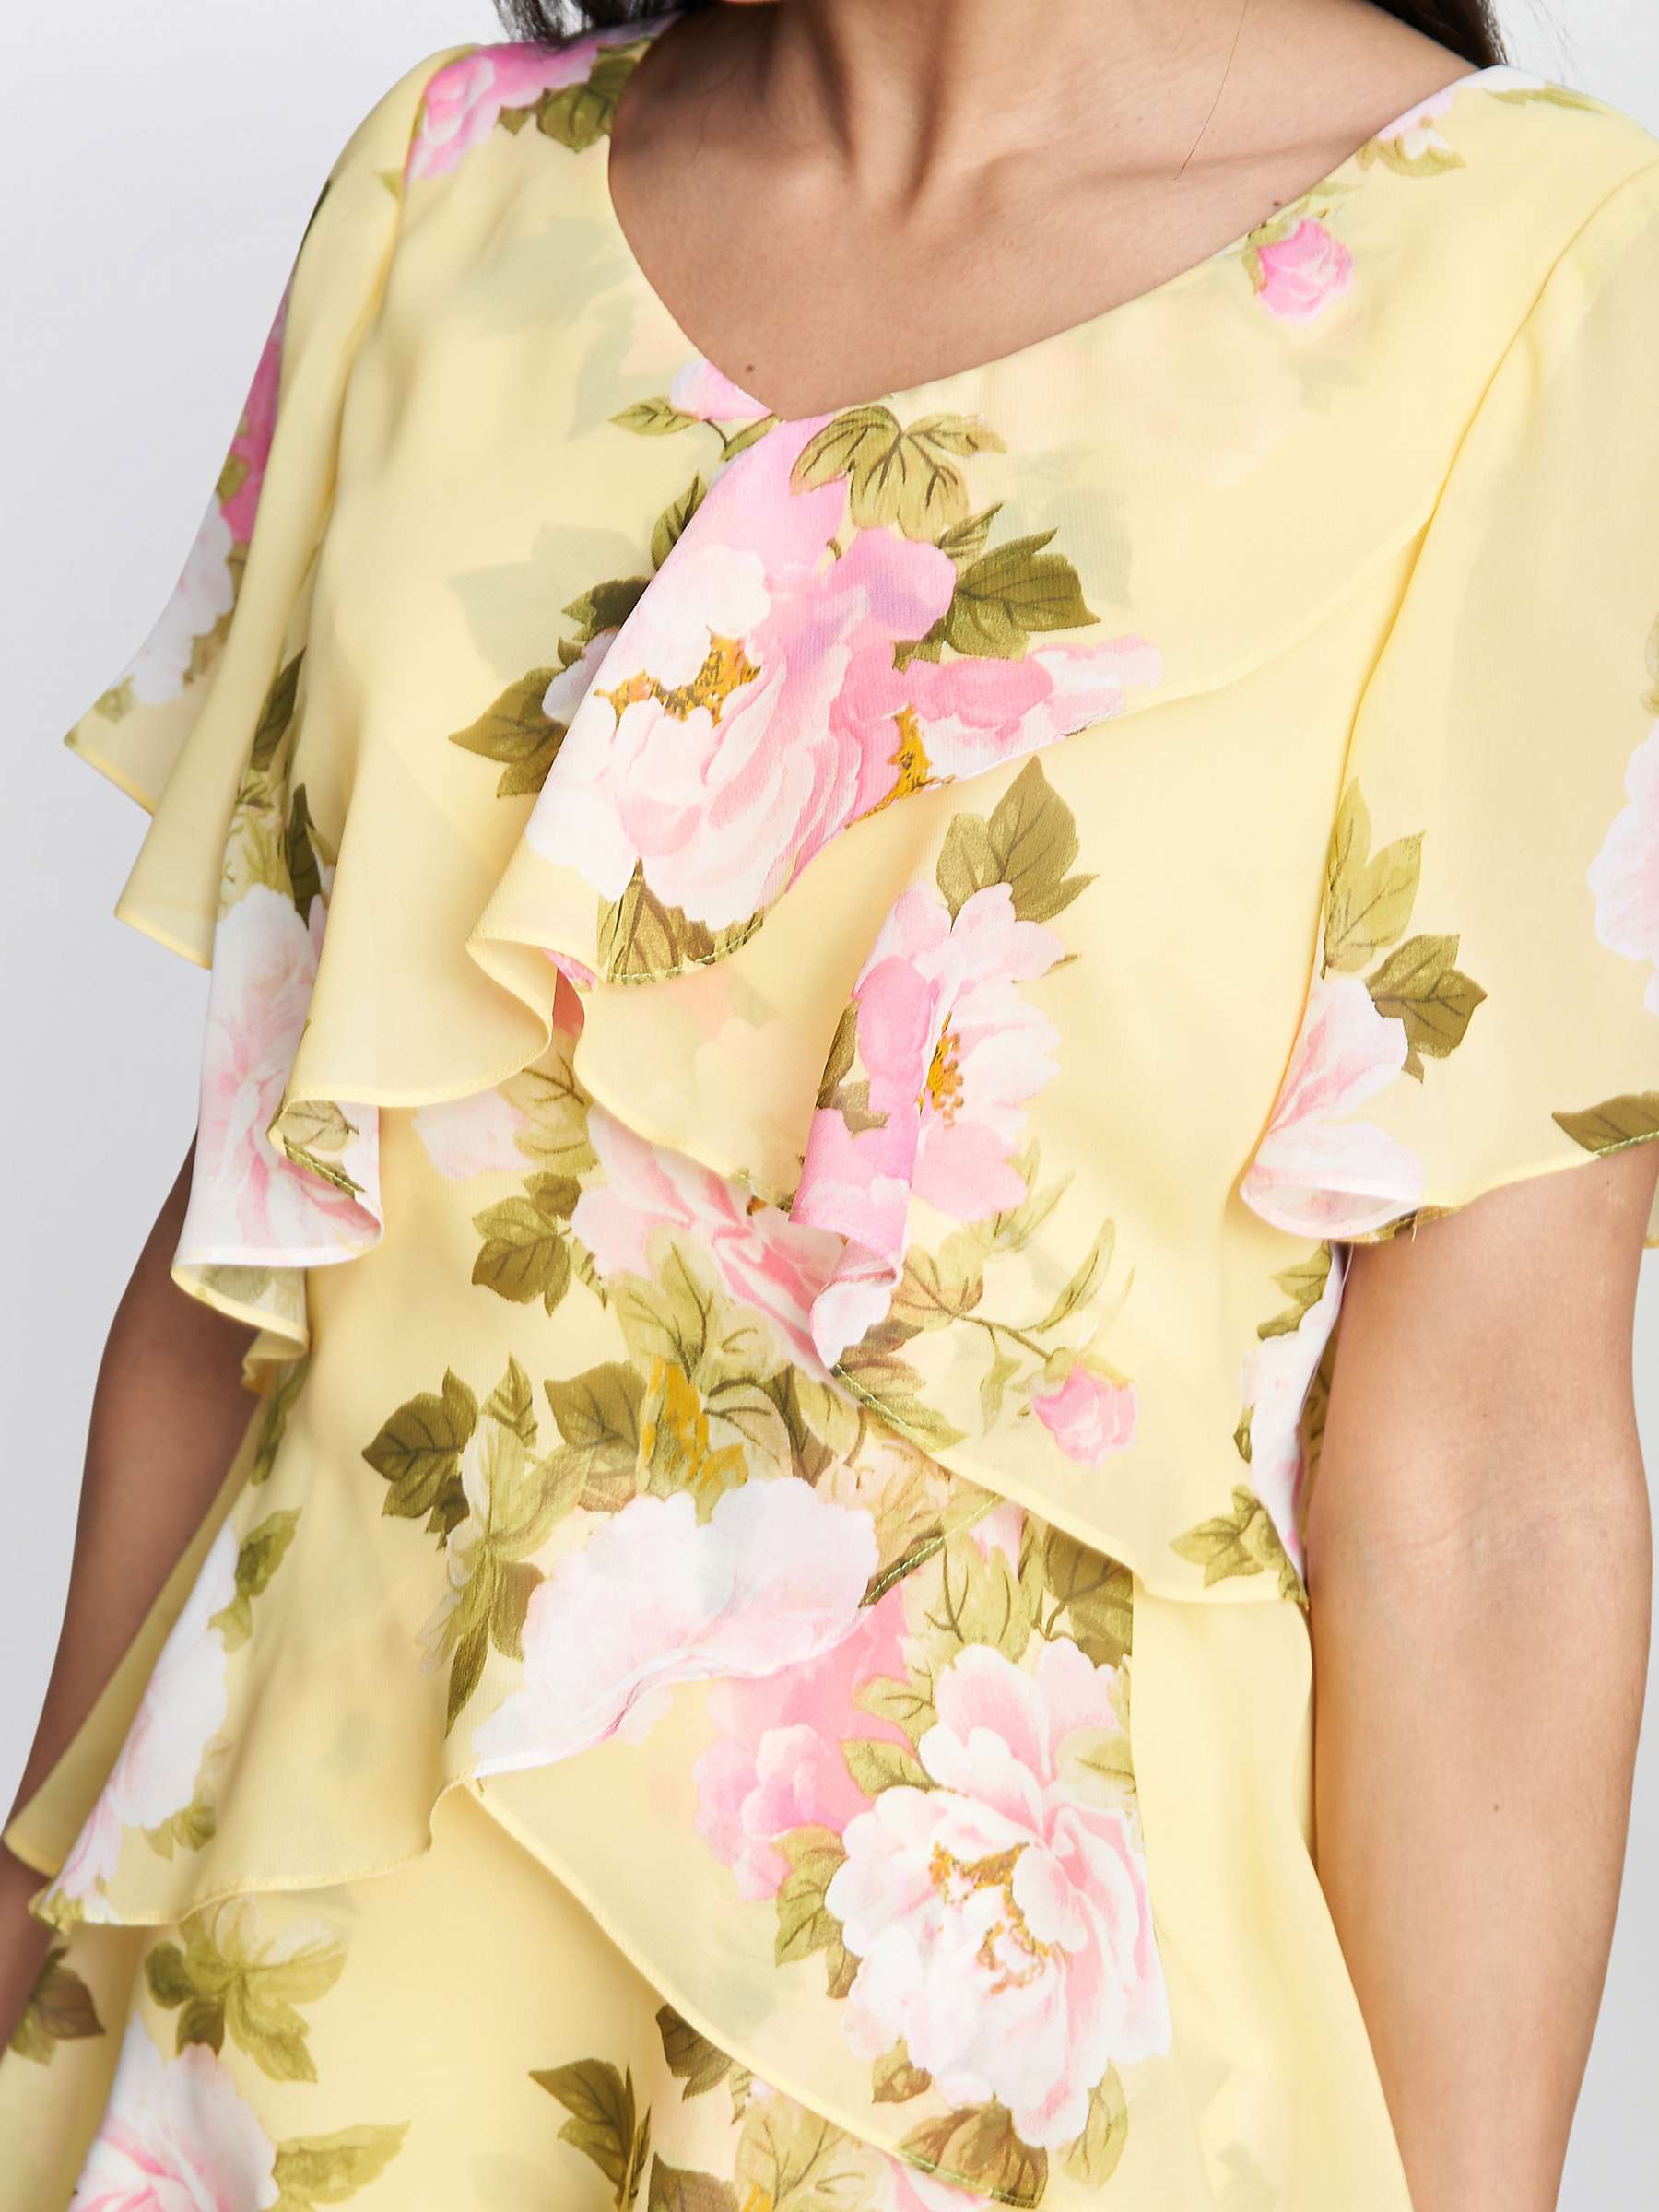 Buy Gina Bacconi Edith Floral Print Tiered Dress, Yellow Online at johnlewis.com